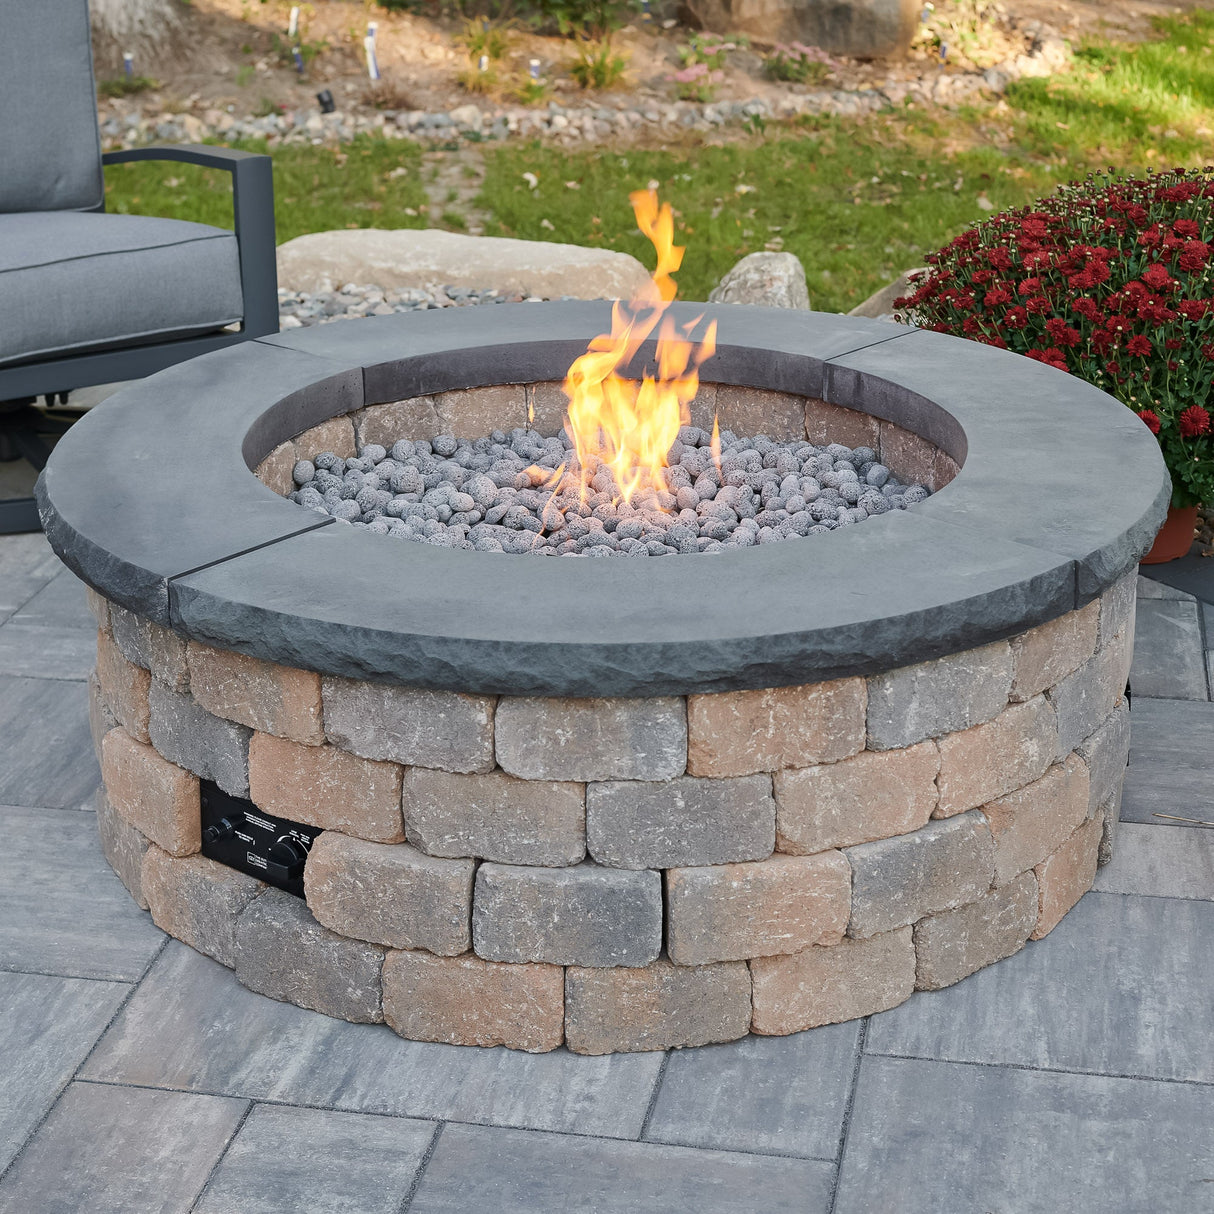 Charcoal Grey Concrete Top for Round Bronson Block Gas Fire Pit Kit with flame on a patio